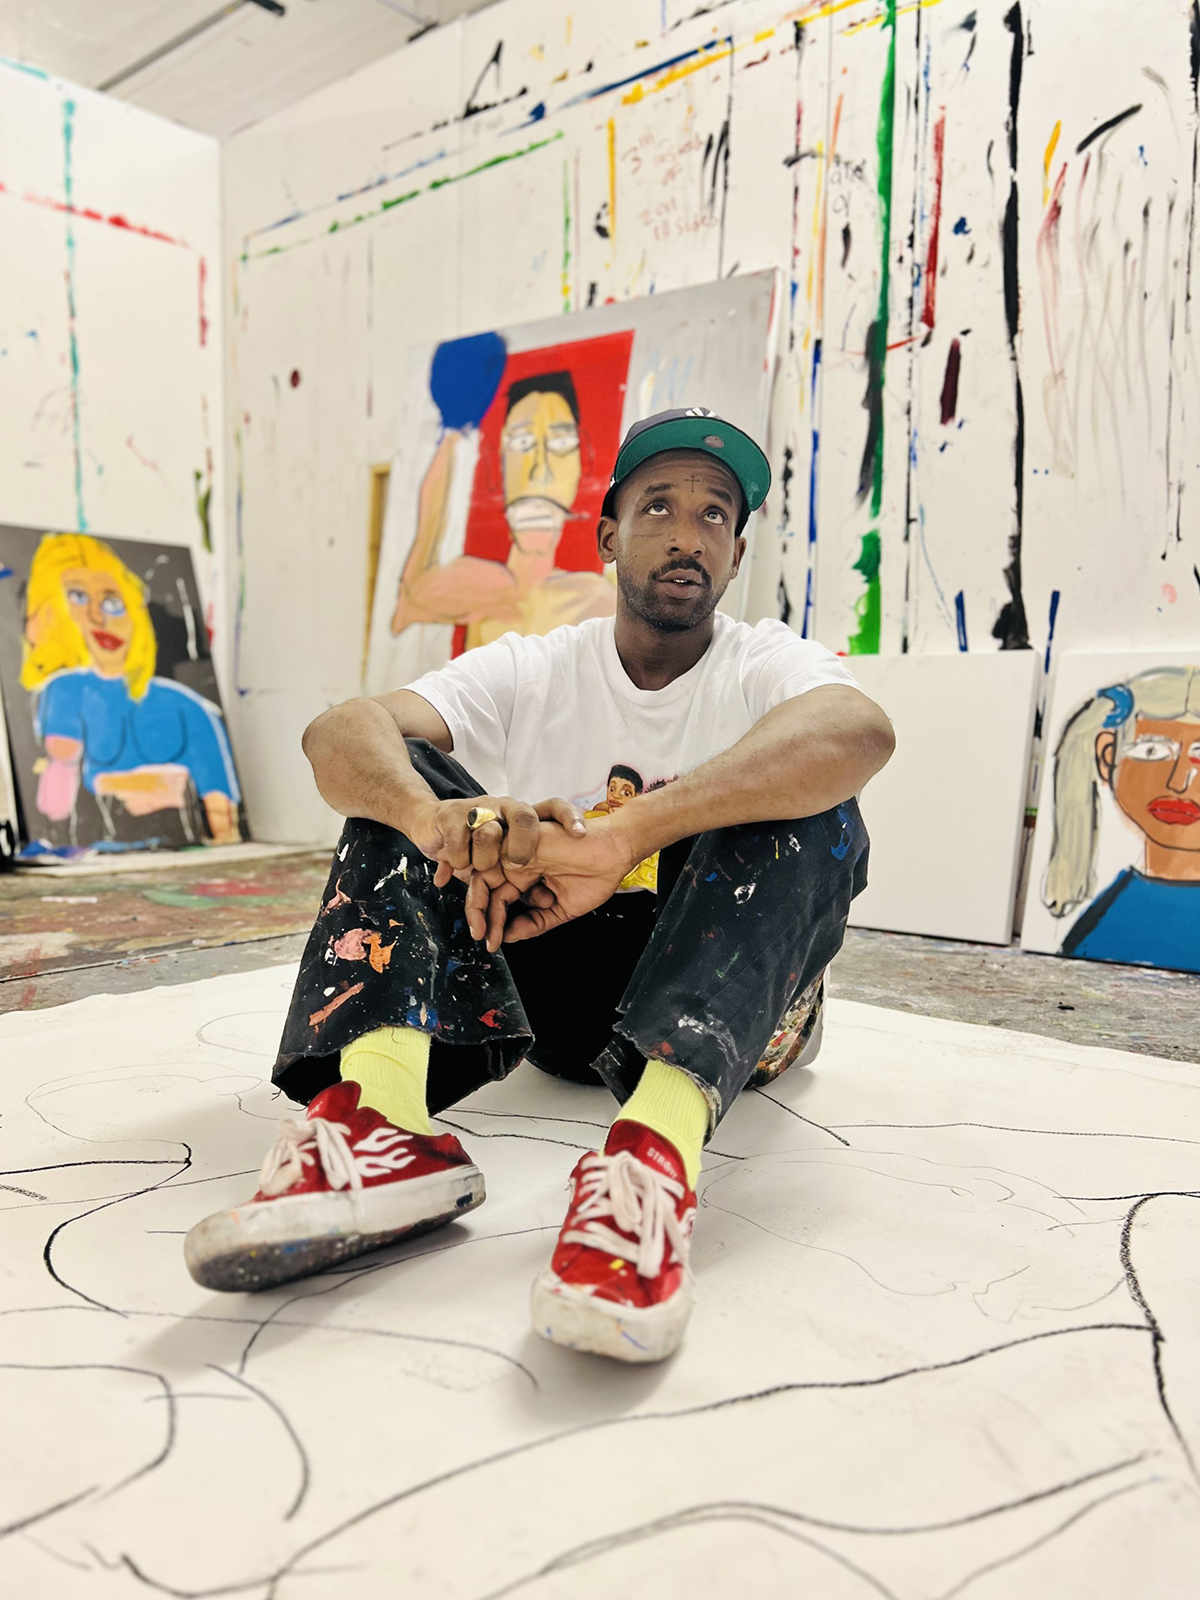 A man sitting on a drawing wearing red shoes, yellow socks, a green cap and white t-shirt with jeans